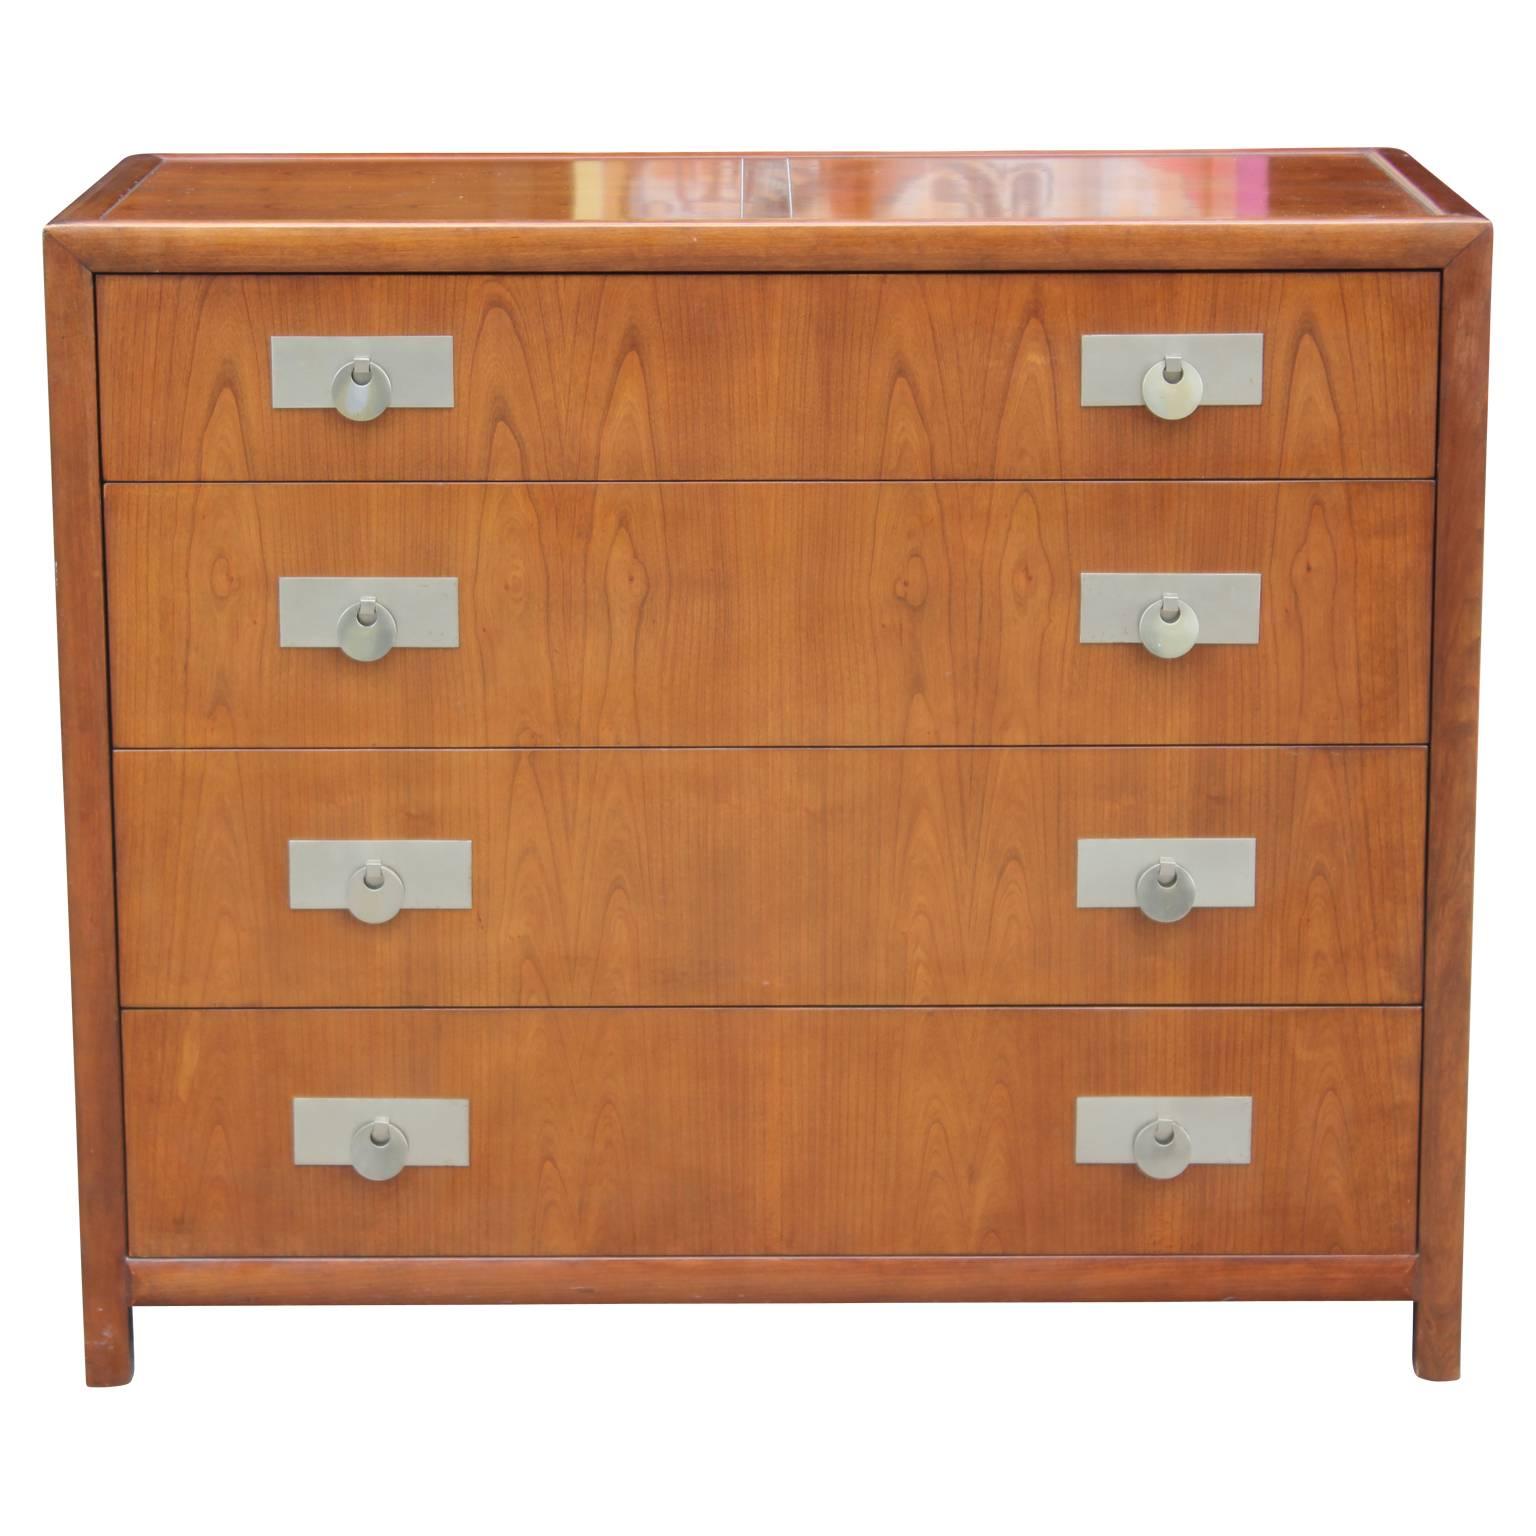 Gorgeous walnut Michael Taylor four-drawer chest of drawers or dresser with nickel-plated pulls by Beaker furniture. Perfect for any modern or mid-mod home. In great condition for its age.